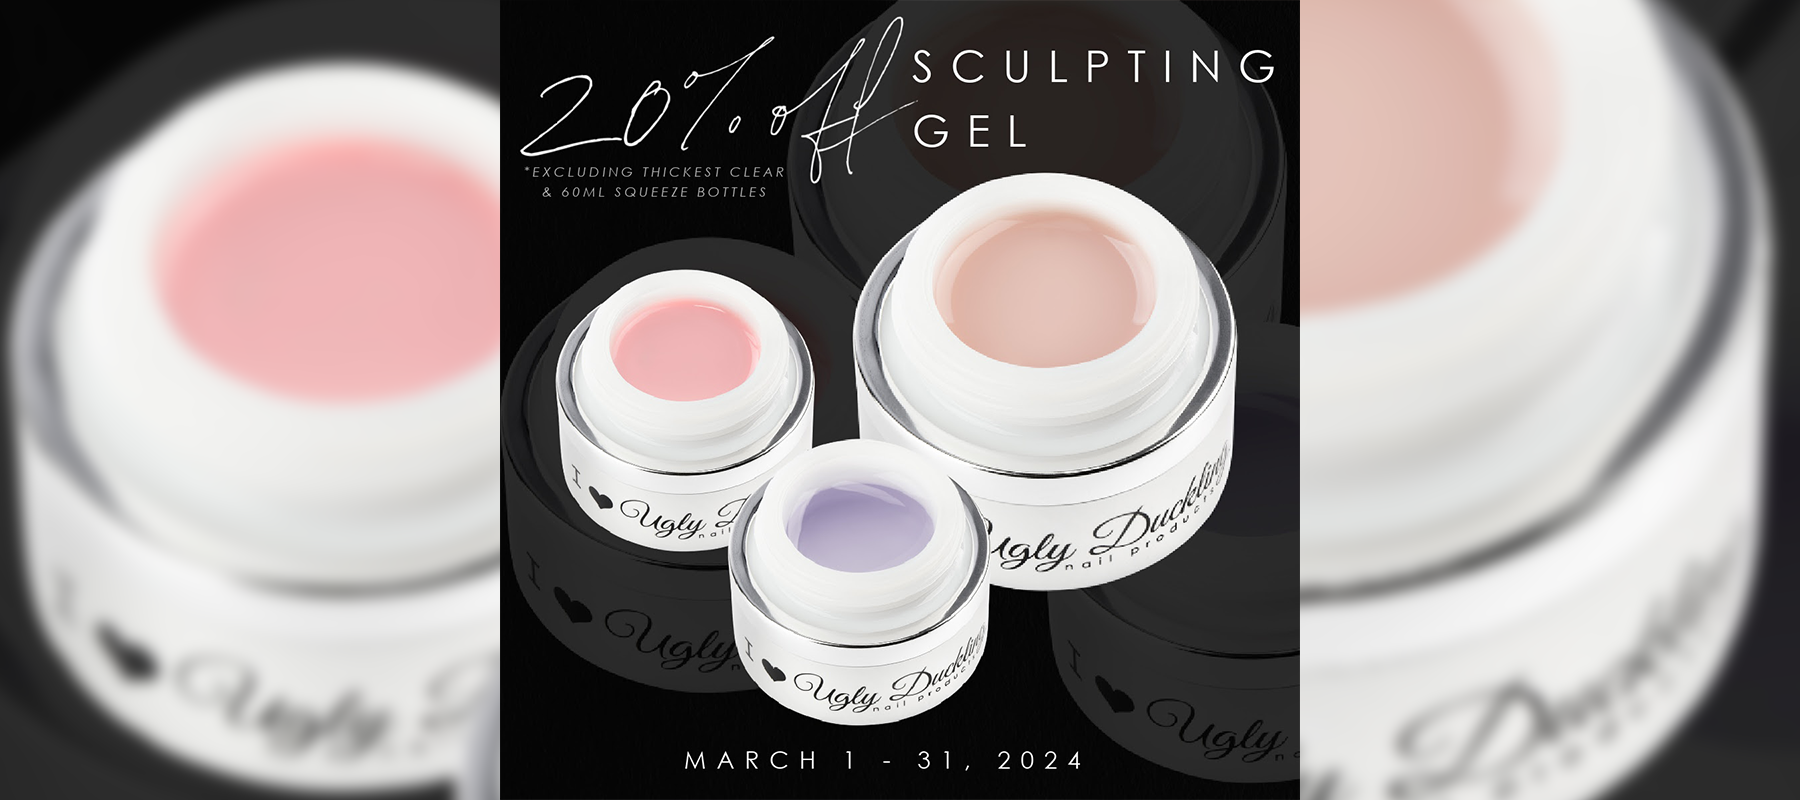 Ugly Duckling March 2024 Promotion 20% off sculpting gel